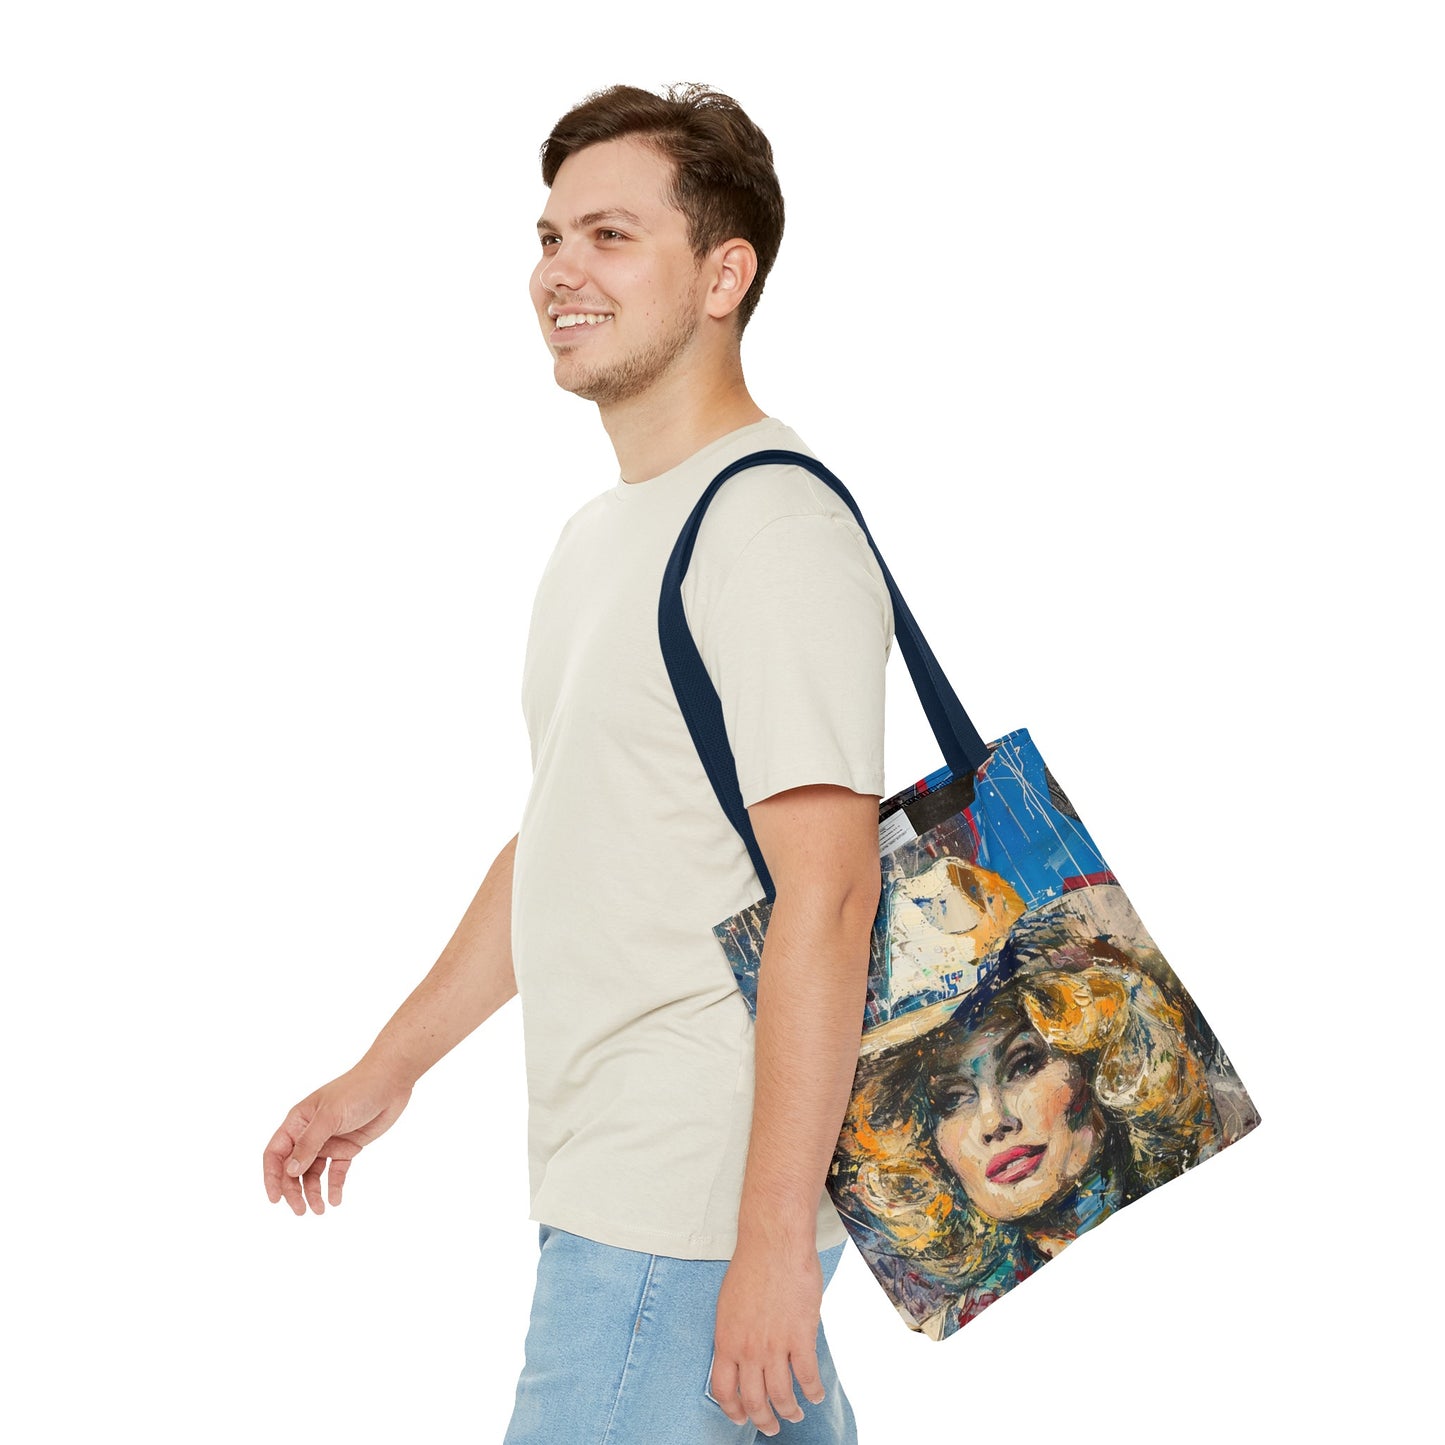 Tote Bag - Country Queen